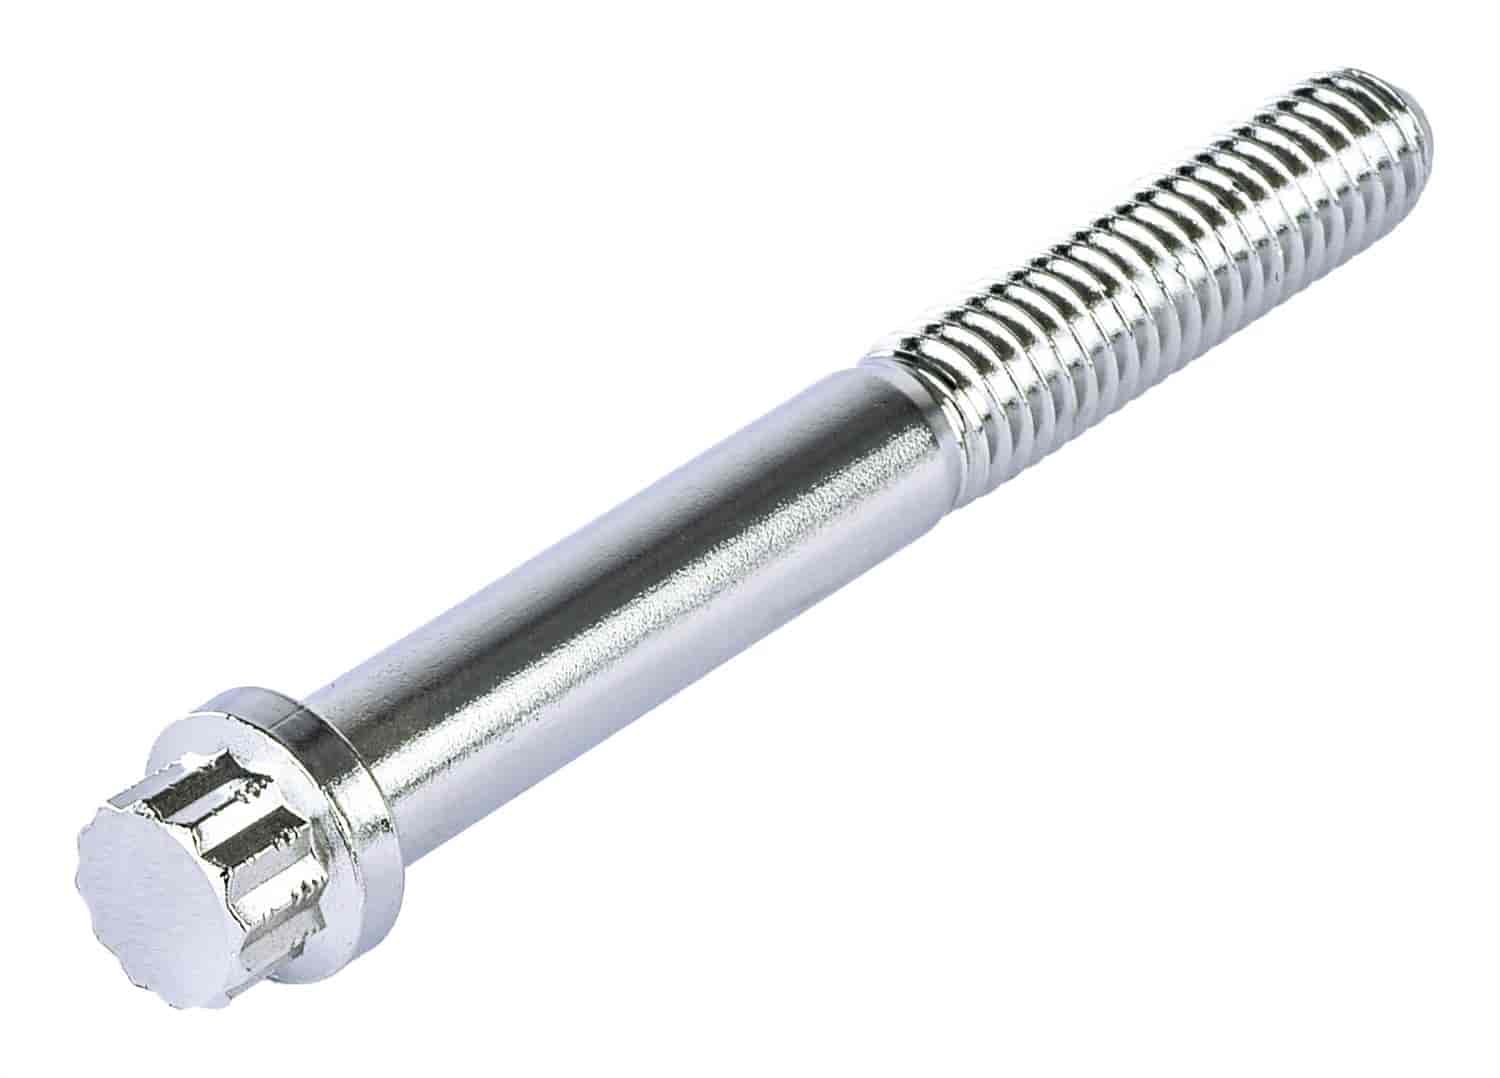 12-Point Fastener [5/16 in. -18 Thread x 2 3/4 (.750) in. Length]